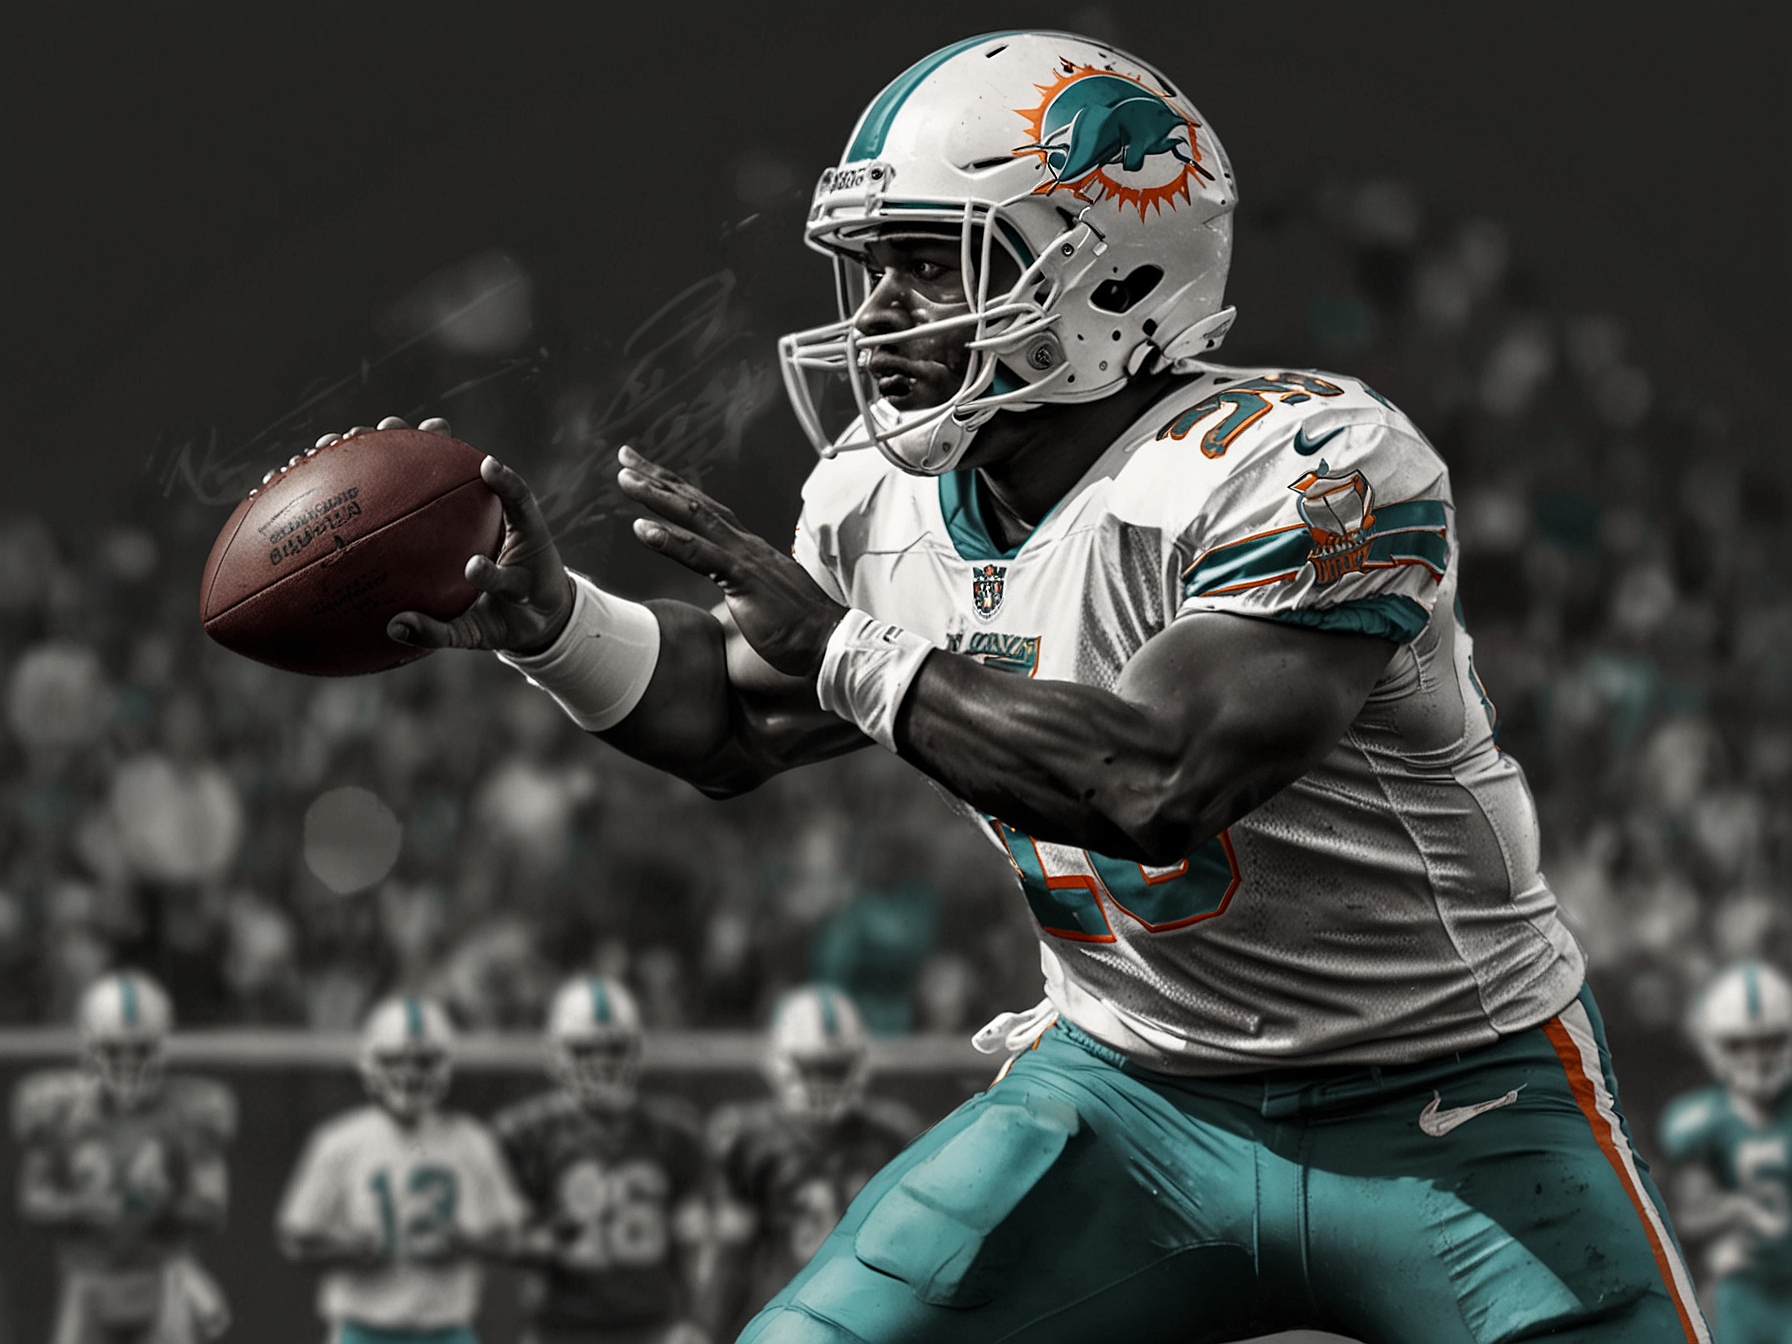 A Miami Dolphins player preparing to throw a football during a game, symbolizing the team's offensive strategies.